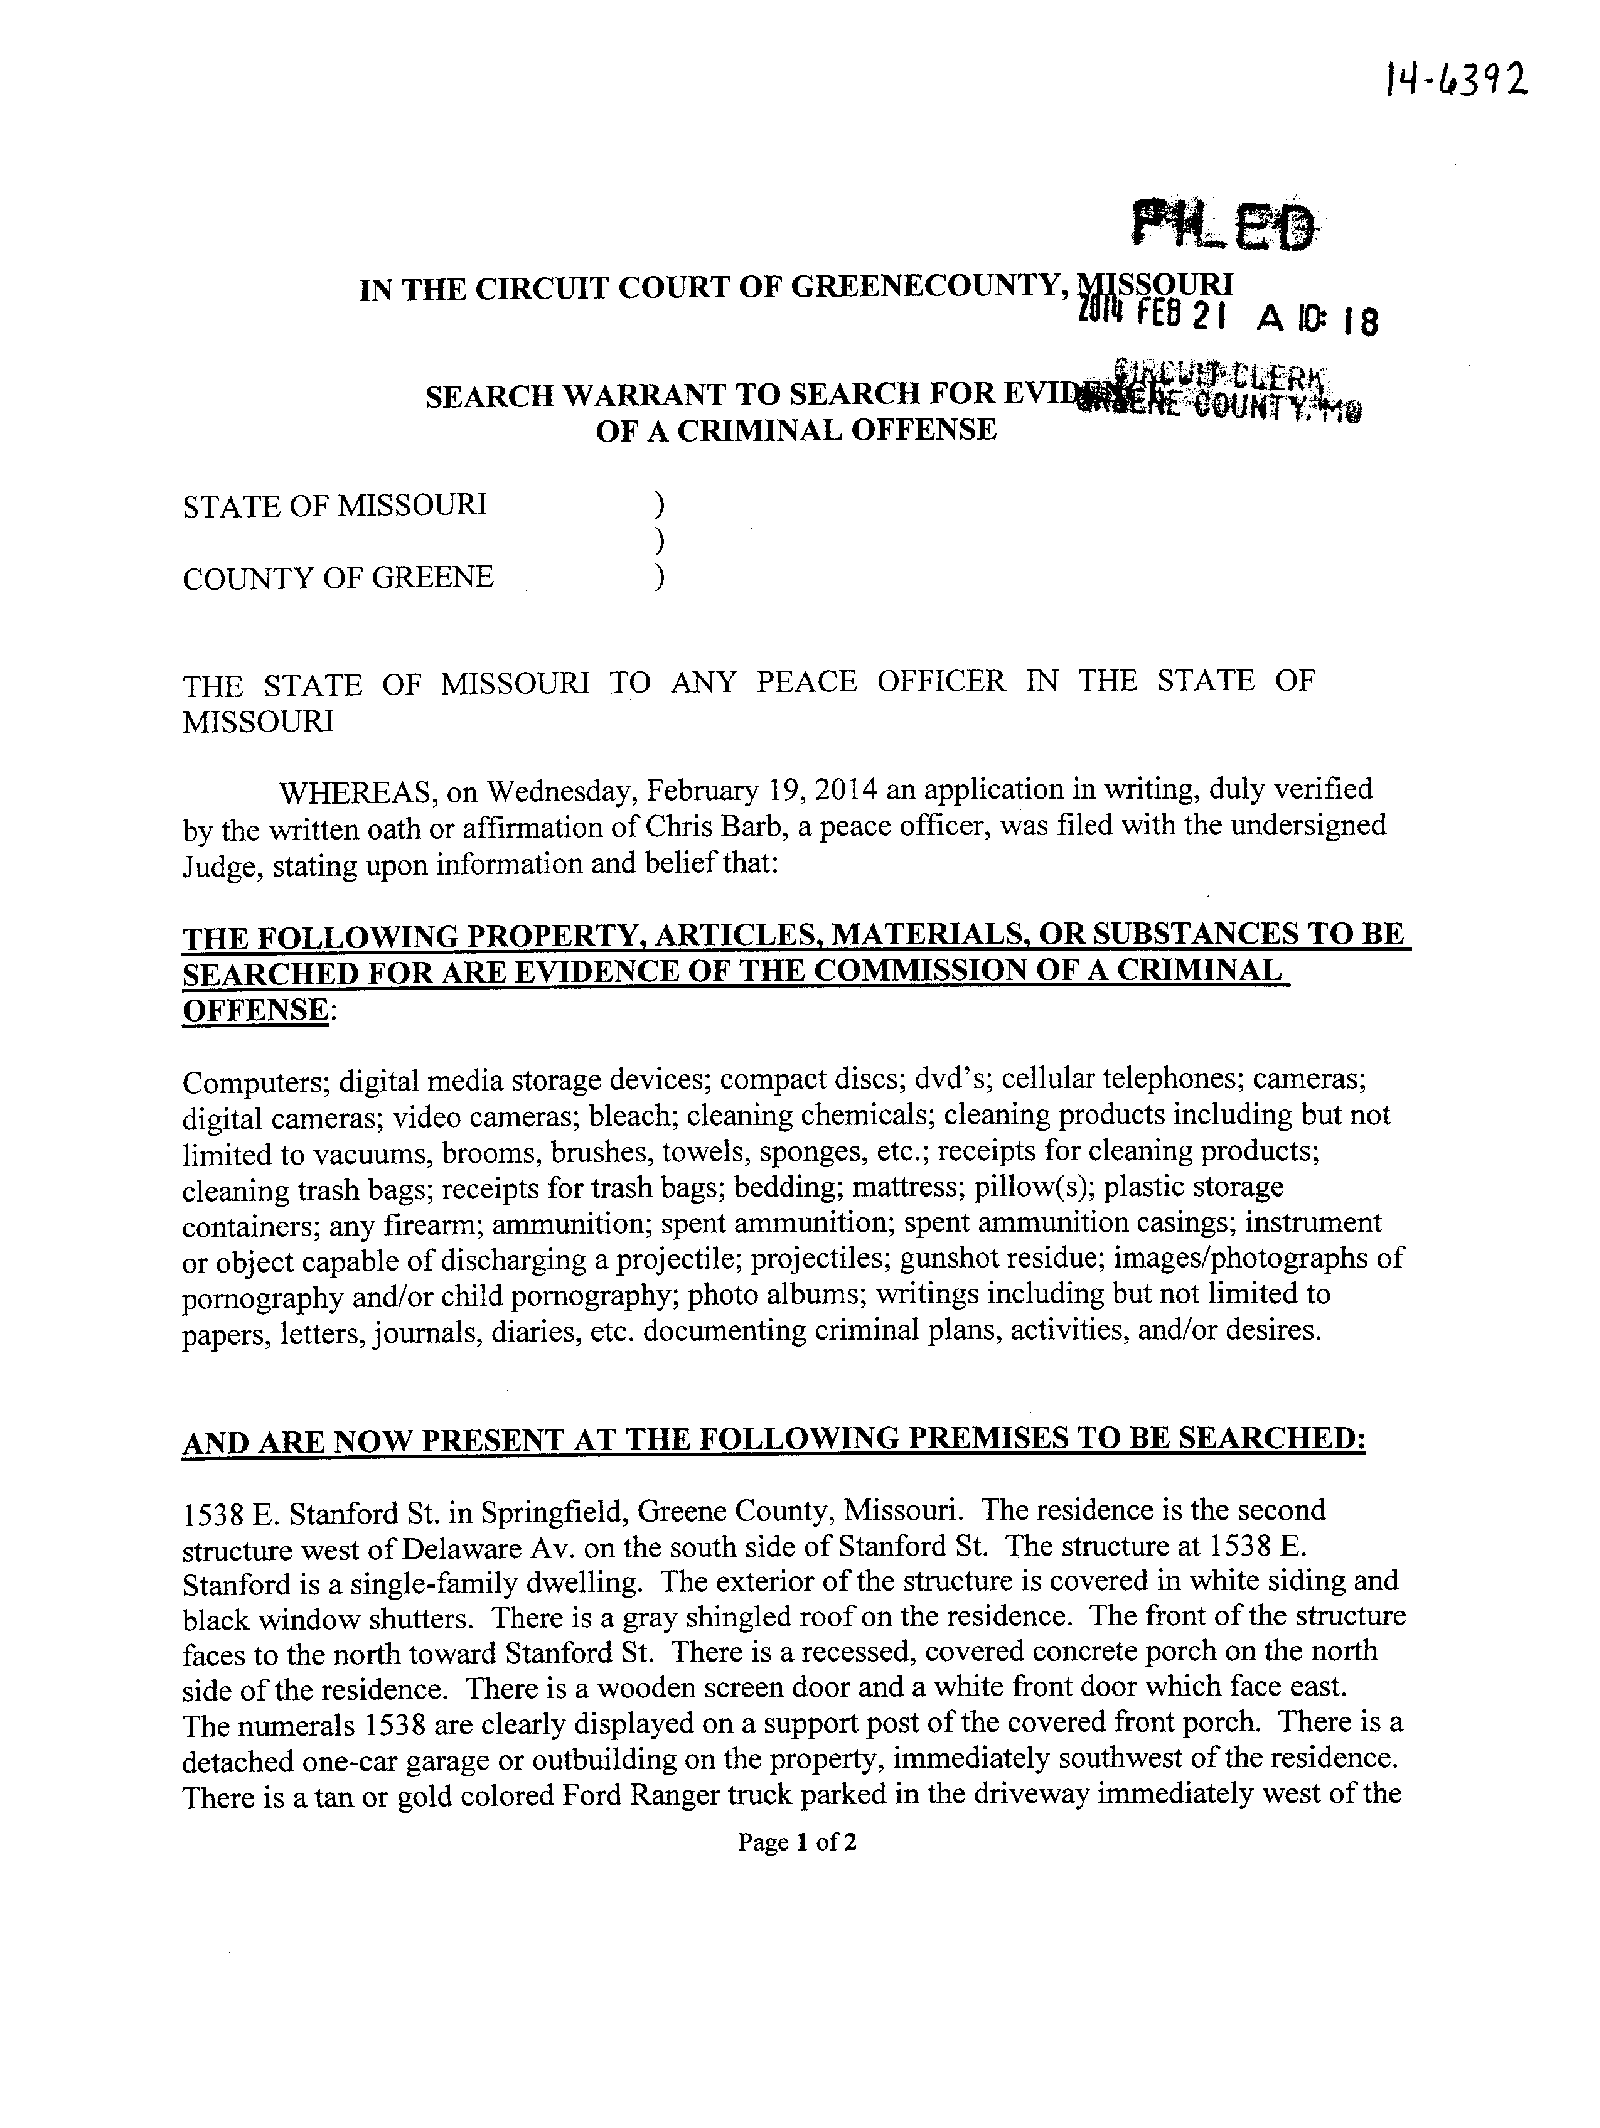 Copy of Search Warrant Return06.png